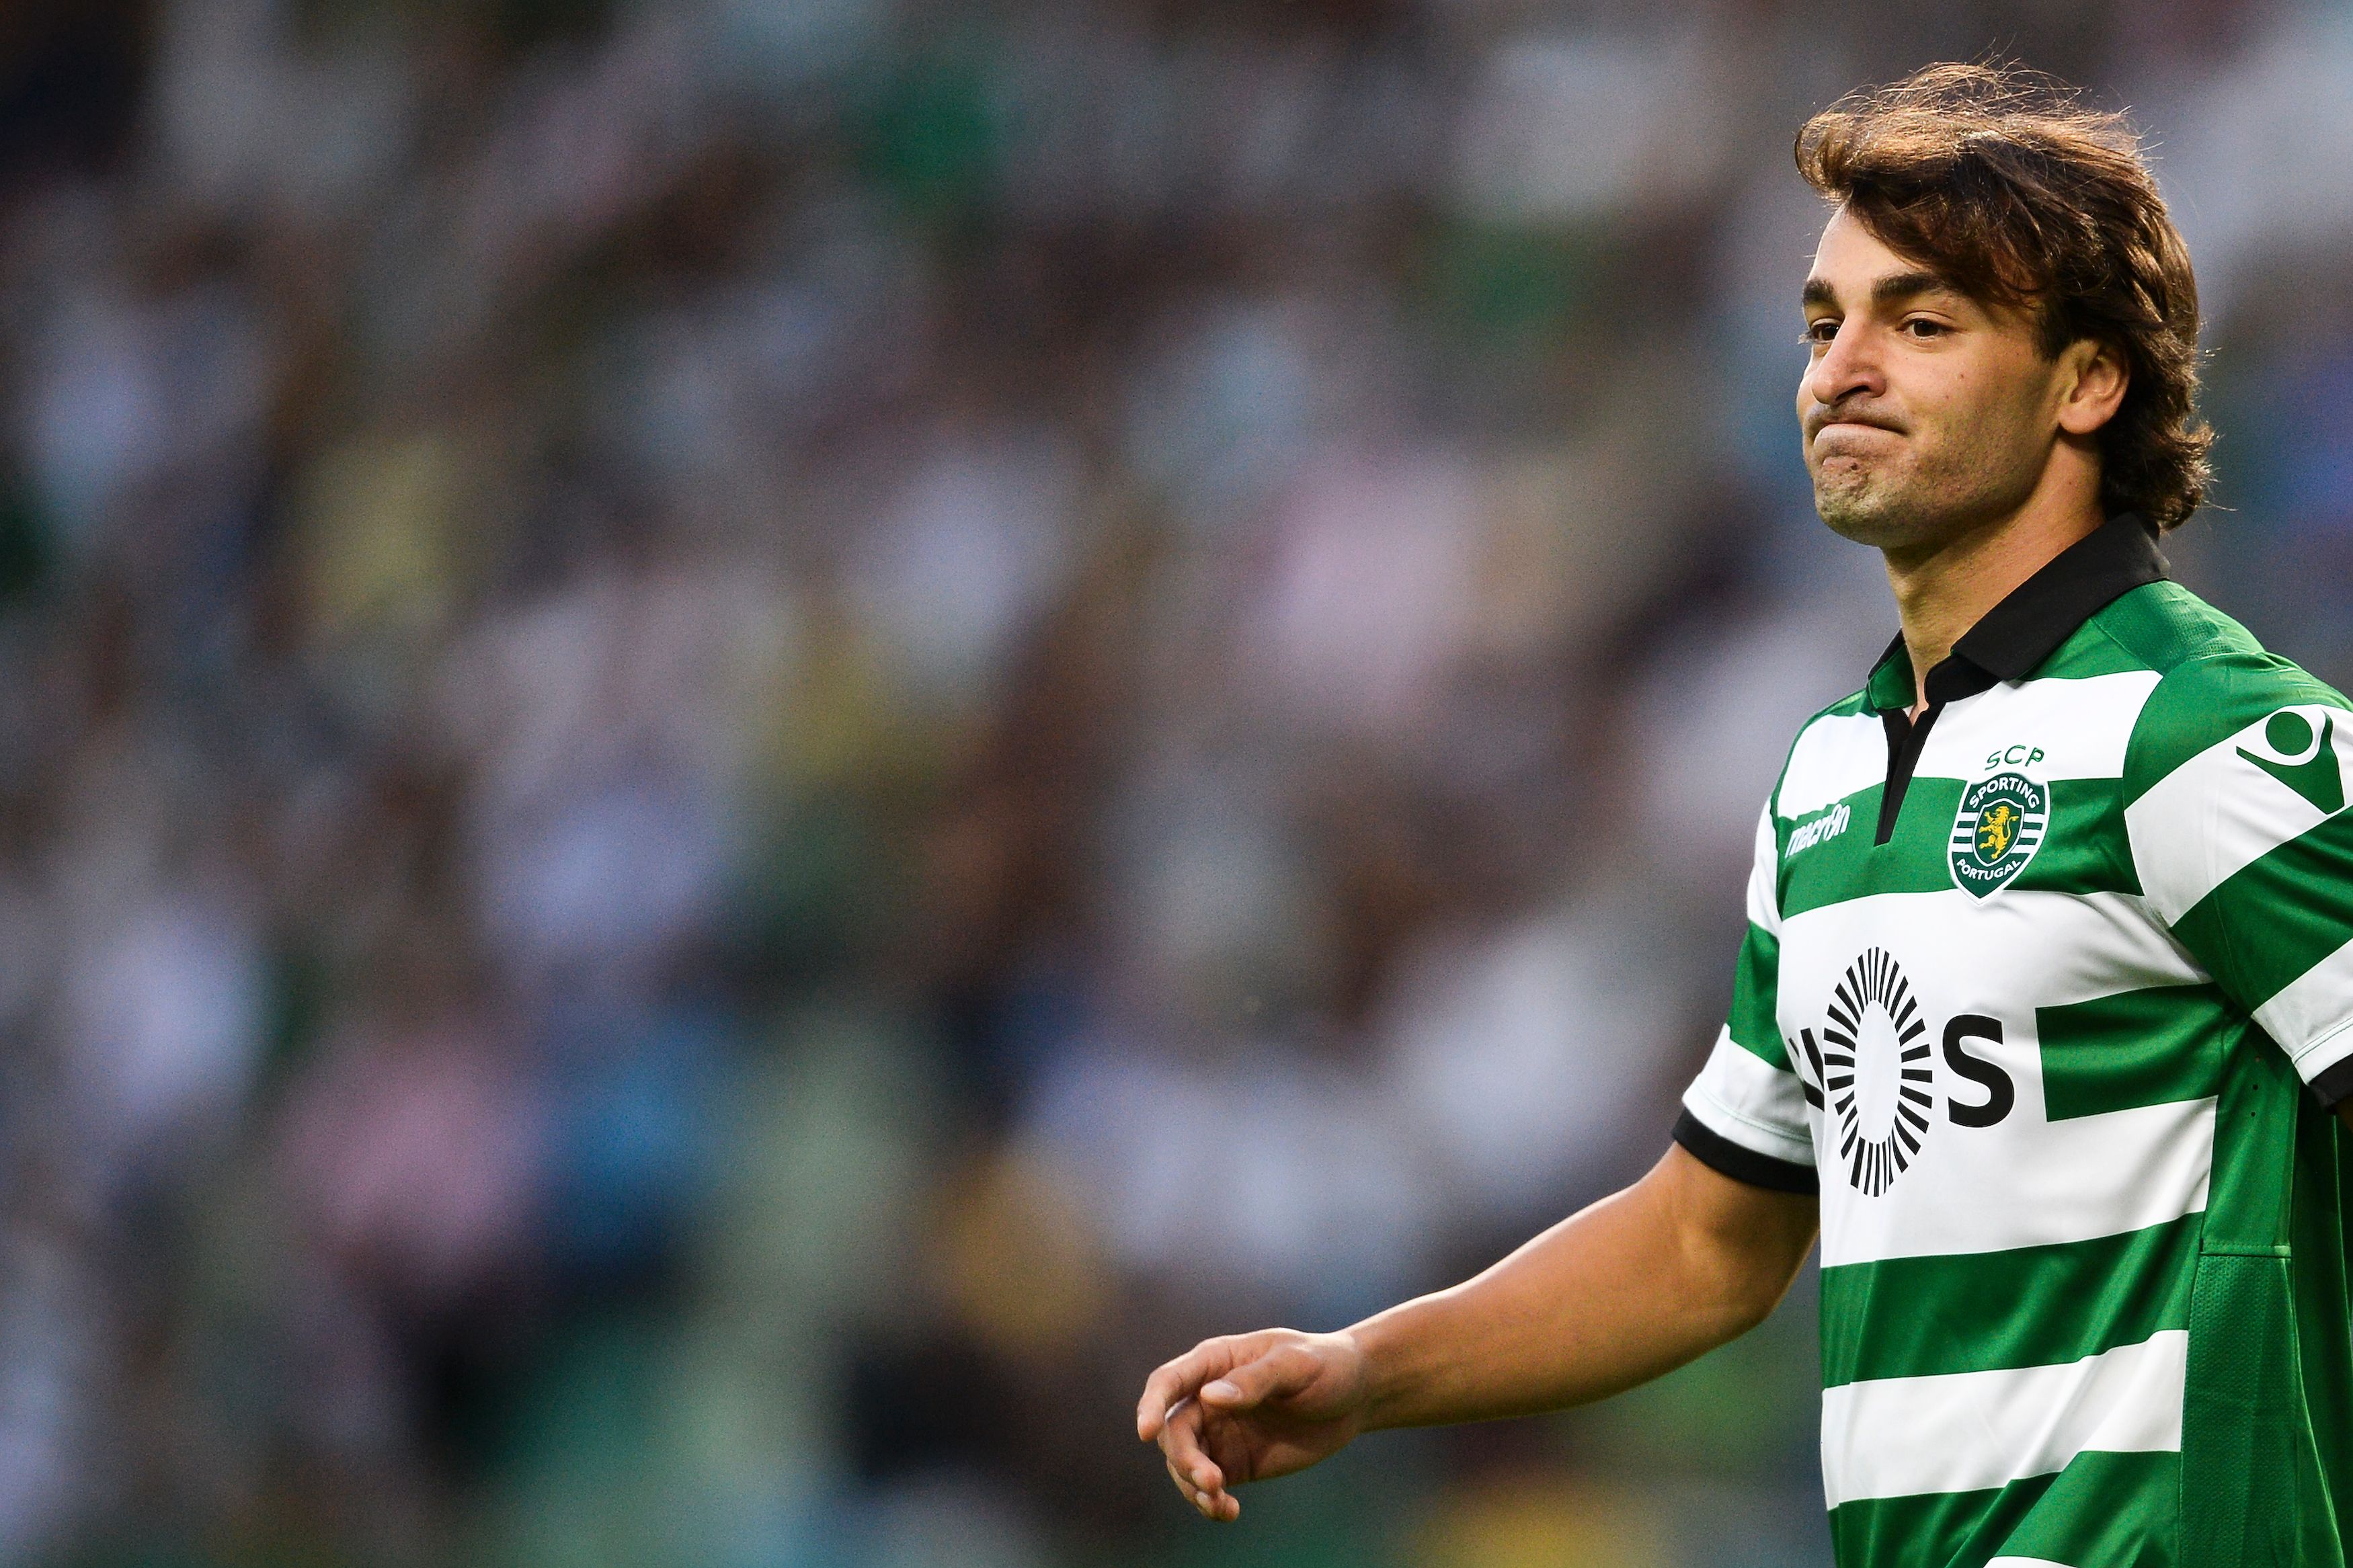 Sporting's Serbian forward Lazar Markovic looks on during the Portuguese league football match Sporting CP vs Moreirense FC at the Jose Alvalade stadium in Lisbon on September 10, 2016. / AFP / PATRICIA DE MELO MOREIRA        (Photo credit should read PATRICIA DE MELO MOREIRA/AFP/Getty Images)